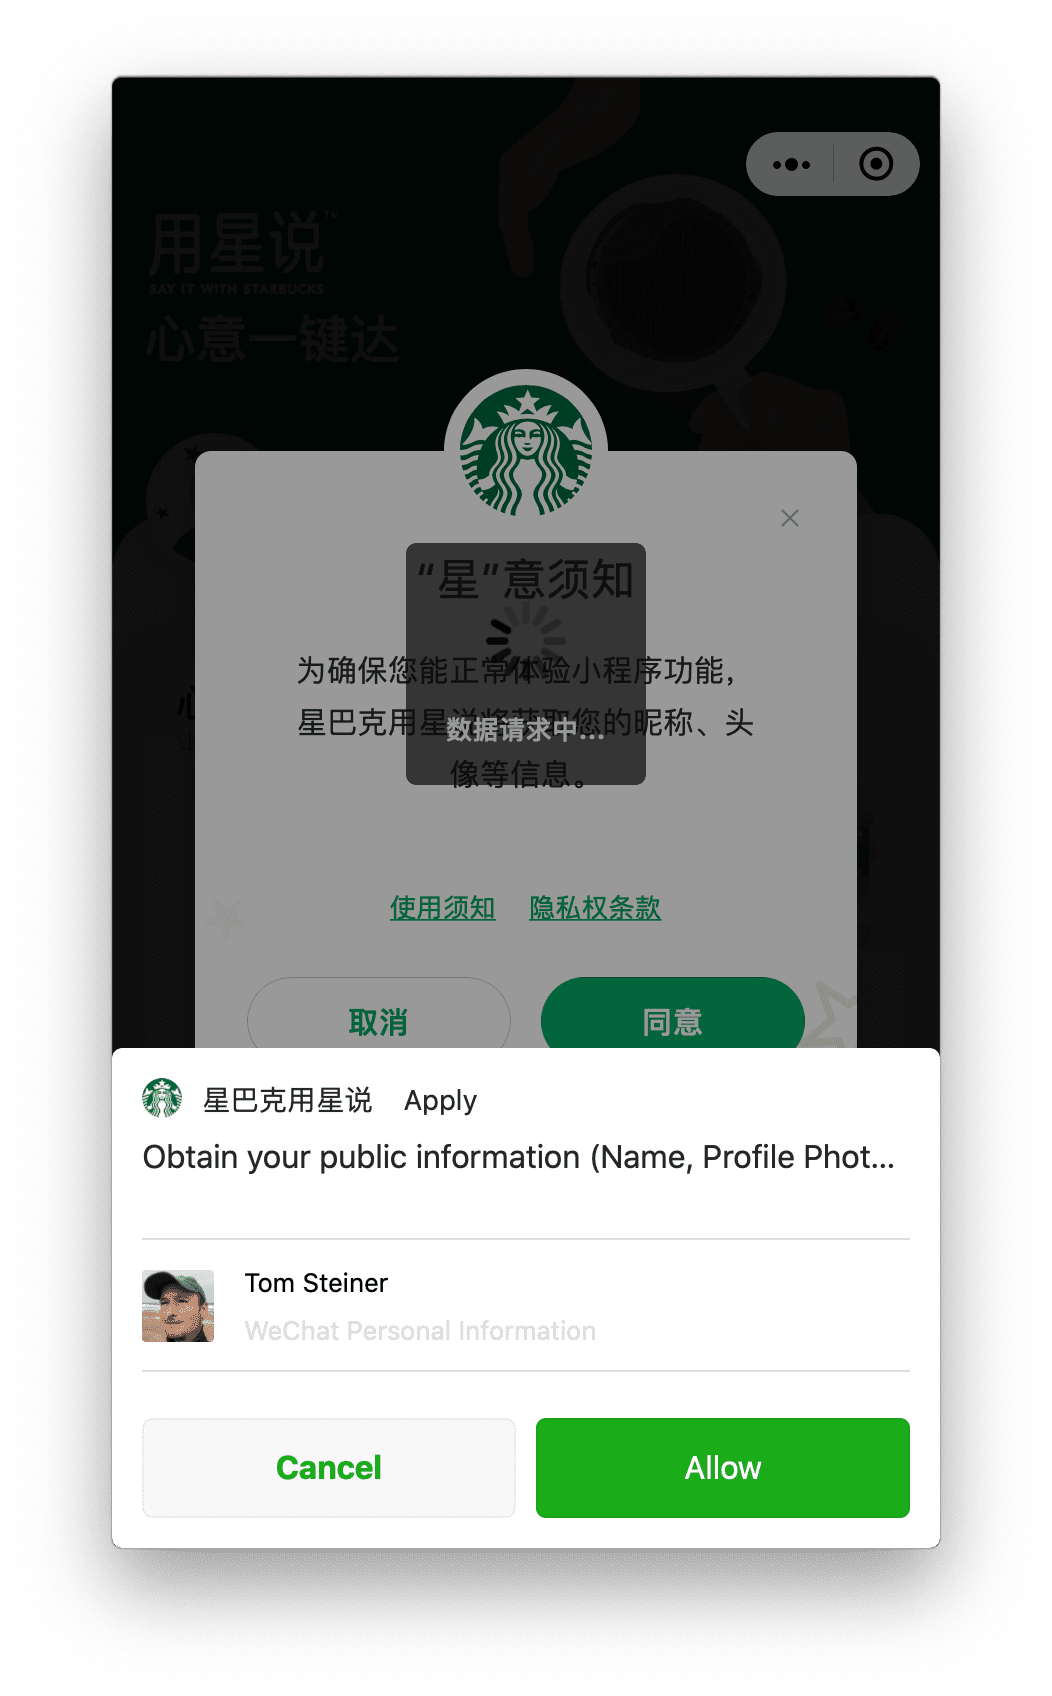 The Starbucks mini app running on macOS asking for the user profile permission which the user can grant via a prompt shown at the bottom.